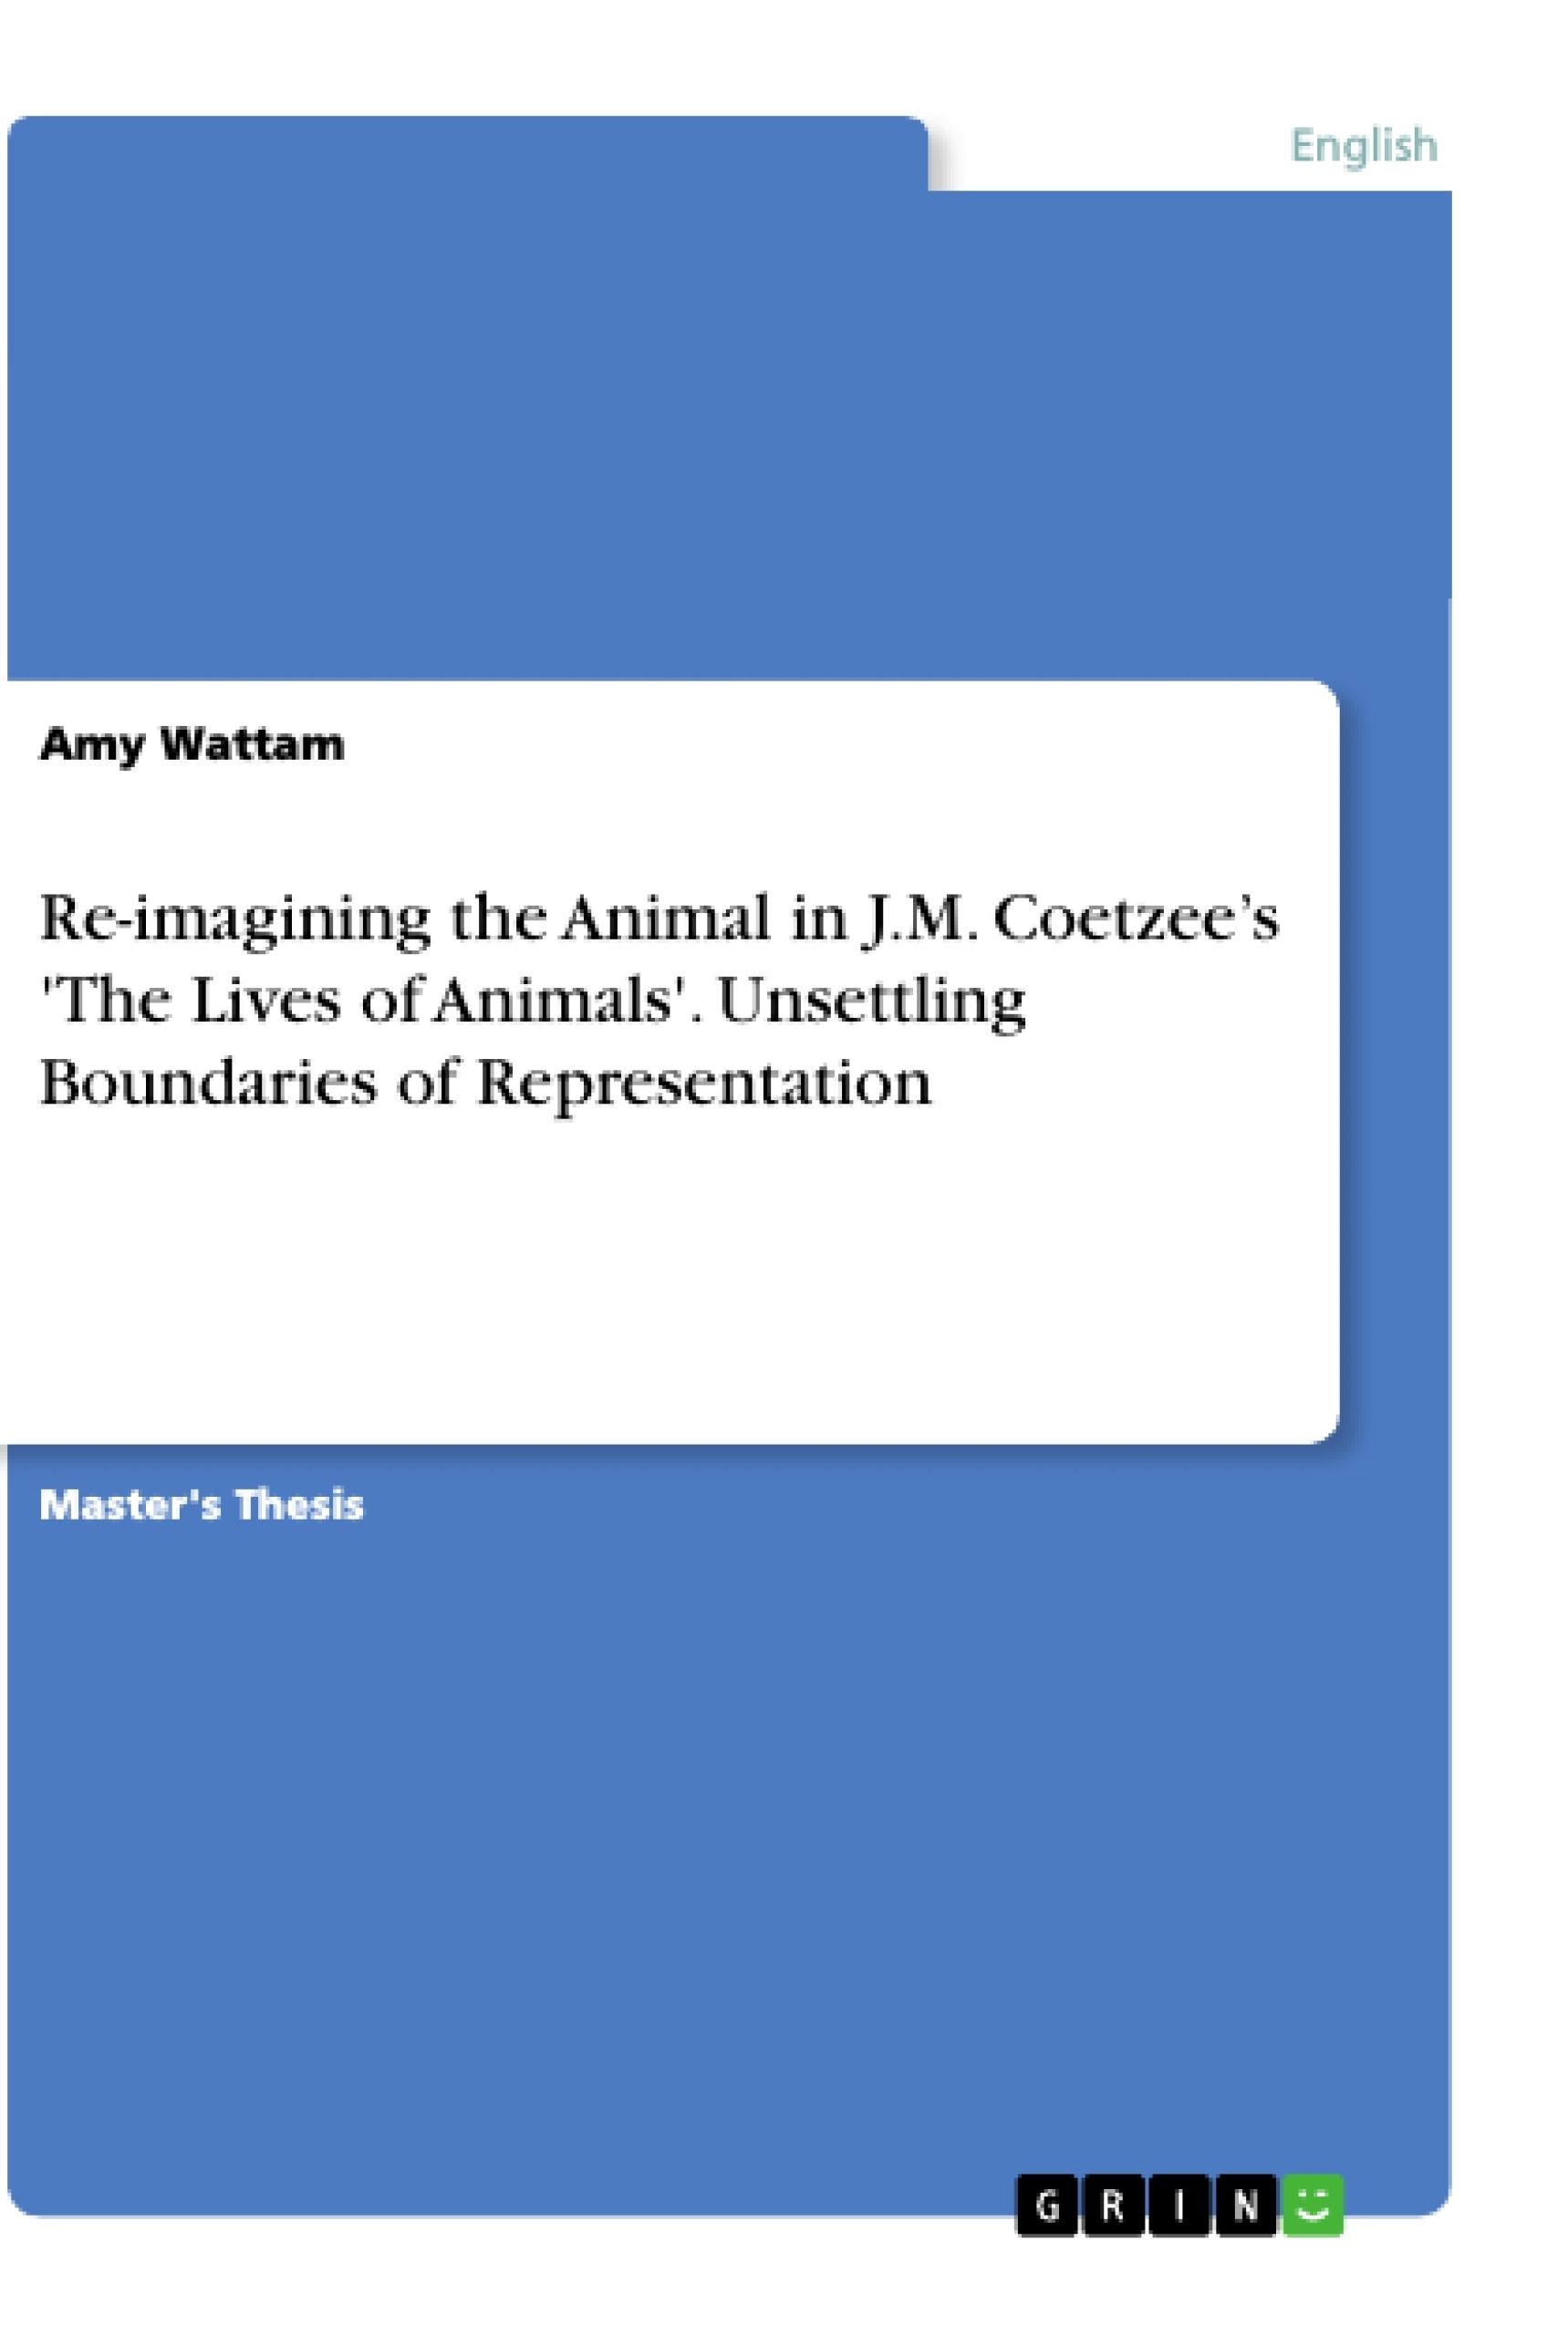 Title: Re-imagining the Animal in J.M. Coetzee’s 'The Lives of Animals'. Unsettling Boundaries of Representation